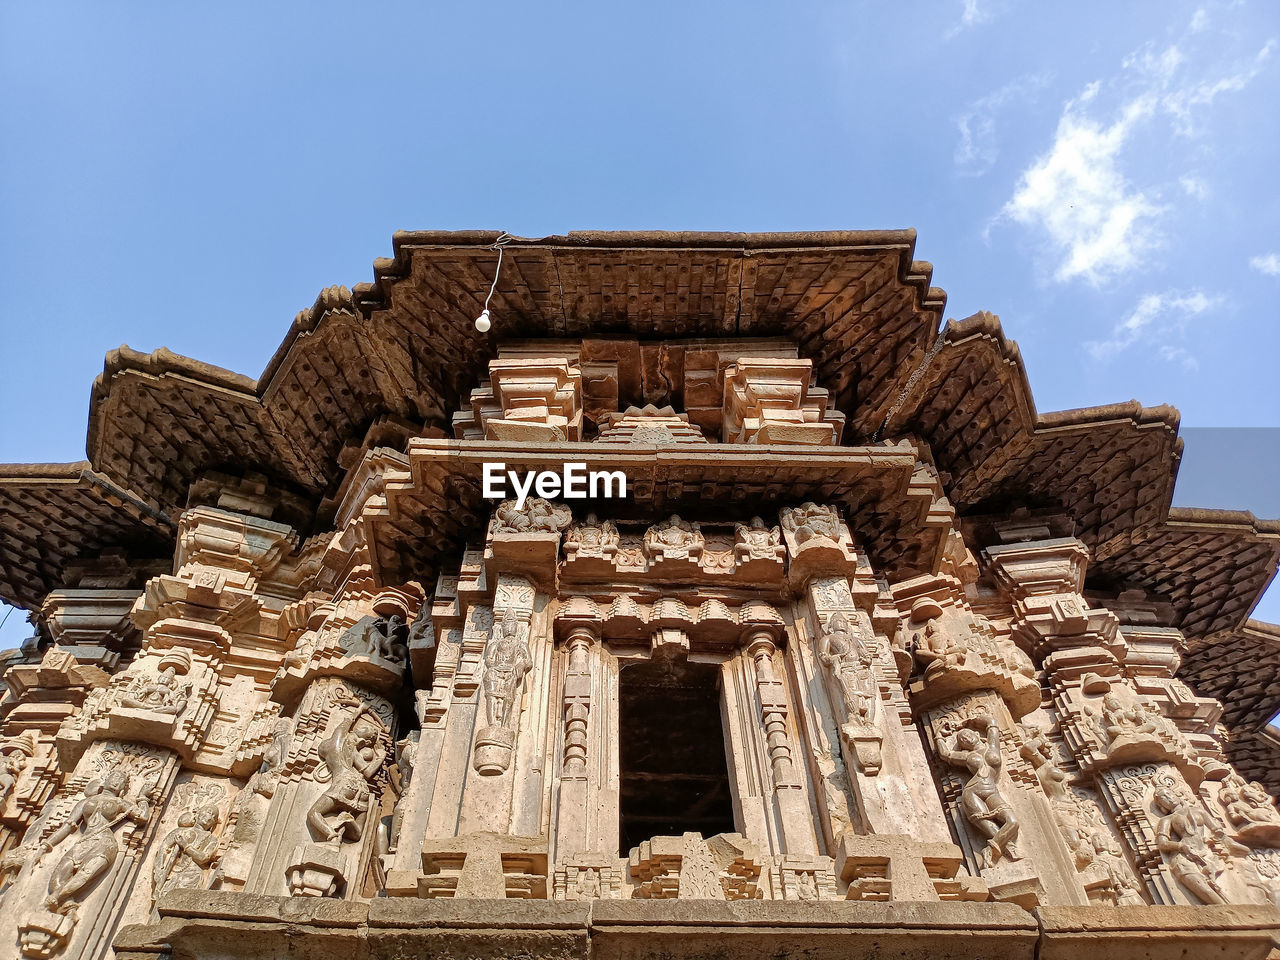 architecture, built structure, history, religion, temple, temple - building, the past, travel destinations, belief, craft, archaeological site, building exterior, building, sky, ancient, travel, ancient history, spirituality, landmark, historic site, place of worship, tourism, nature, sculpture, no people, low angle view, ruins, ancient civilization, stone material, outdoors, statue, day, blue, tradition, cloud, city, ornate, old, old ruin